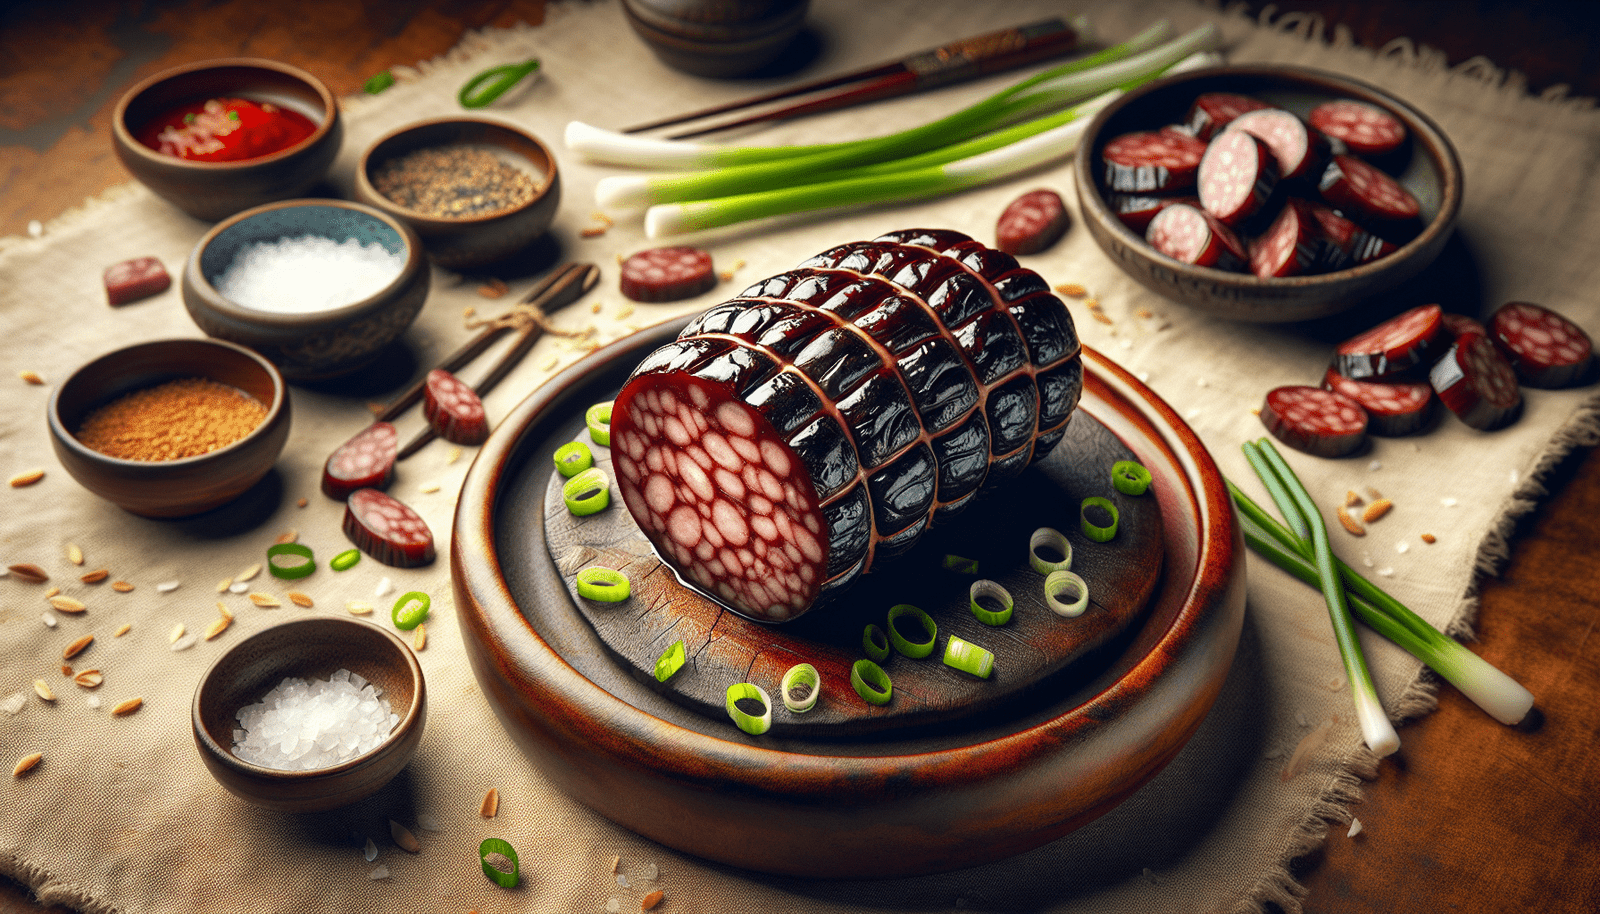 How Do You Properly Prepare And Serve Traditional Korean Blood Sausage (soondae)?